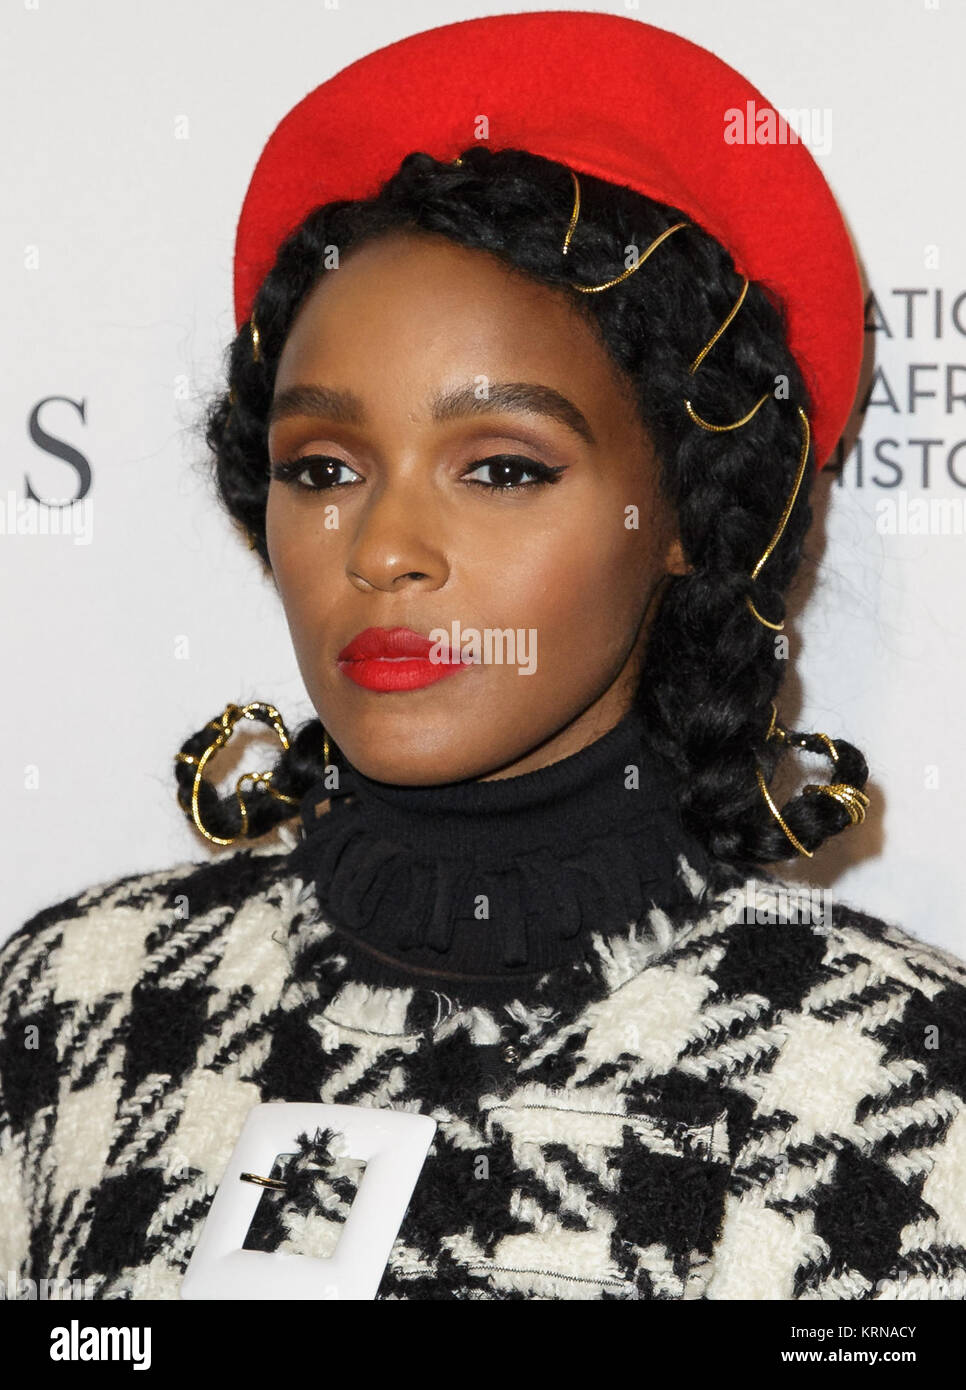 American musical recording artist, actress, and model Janelle Monáe arrives on the red carpet for a screening of the film “Hidden Figures” at the Smithsonian’s National Museum of African American History and Culture, Wednesday, Dec. 14, 2016 in Washington DC. The film is based on the book of the same title, by Margot Lee Shetterly, and chronicles the lives of Katherine Johnson, Dorothy Vaughan and Mary Jackson -- African-American women working at NASA as “human computers,” who were critical to the success of John Glenn’s Friendship 7 mission in 1962. Photo Credit: (NASA/Joel Kowsky) Janelle Mo Stock Photo